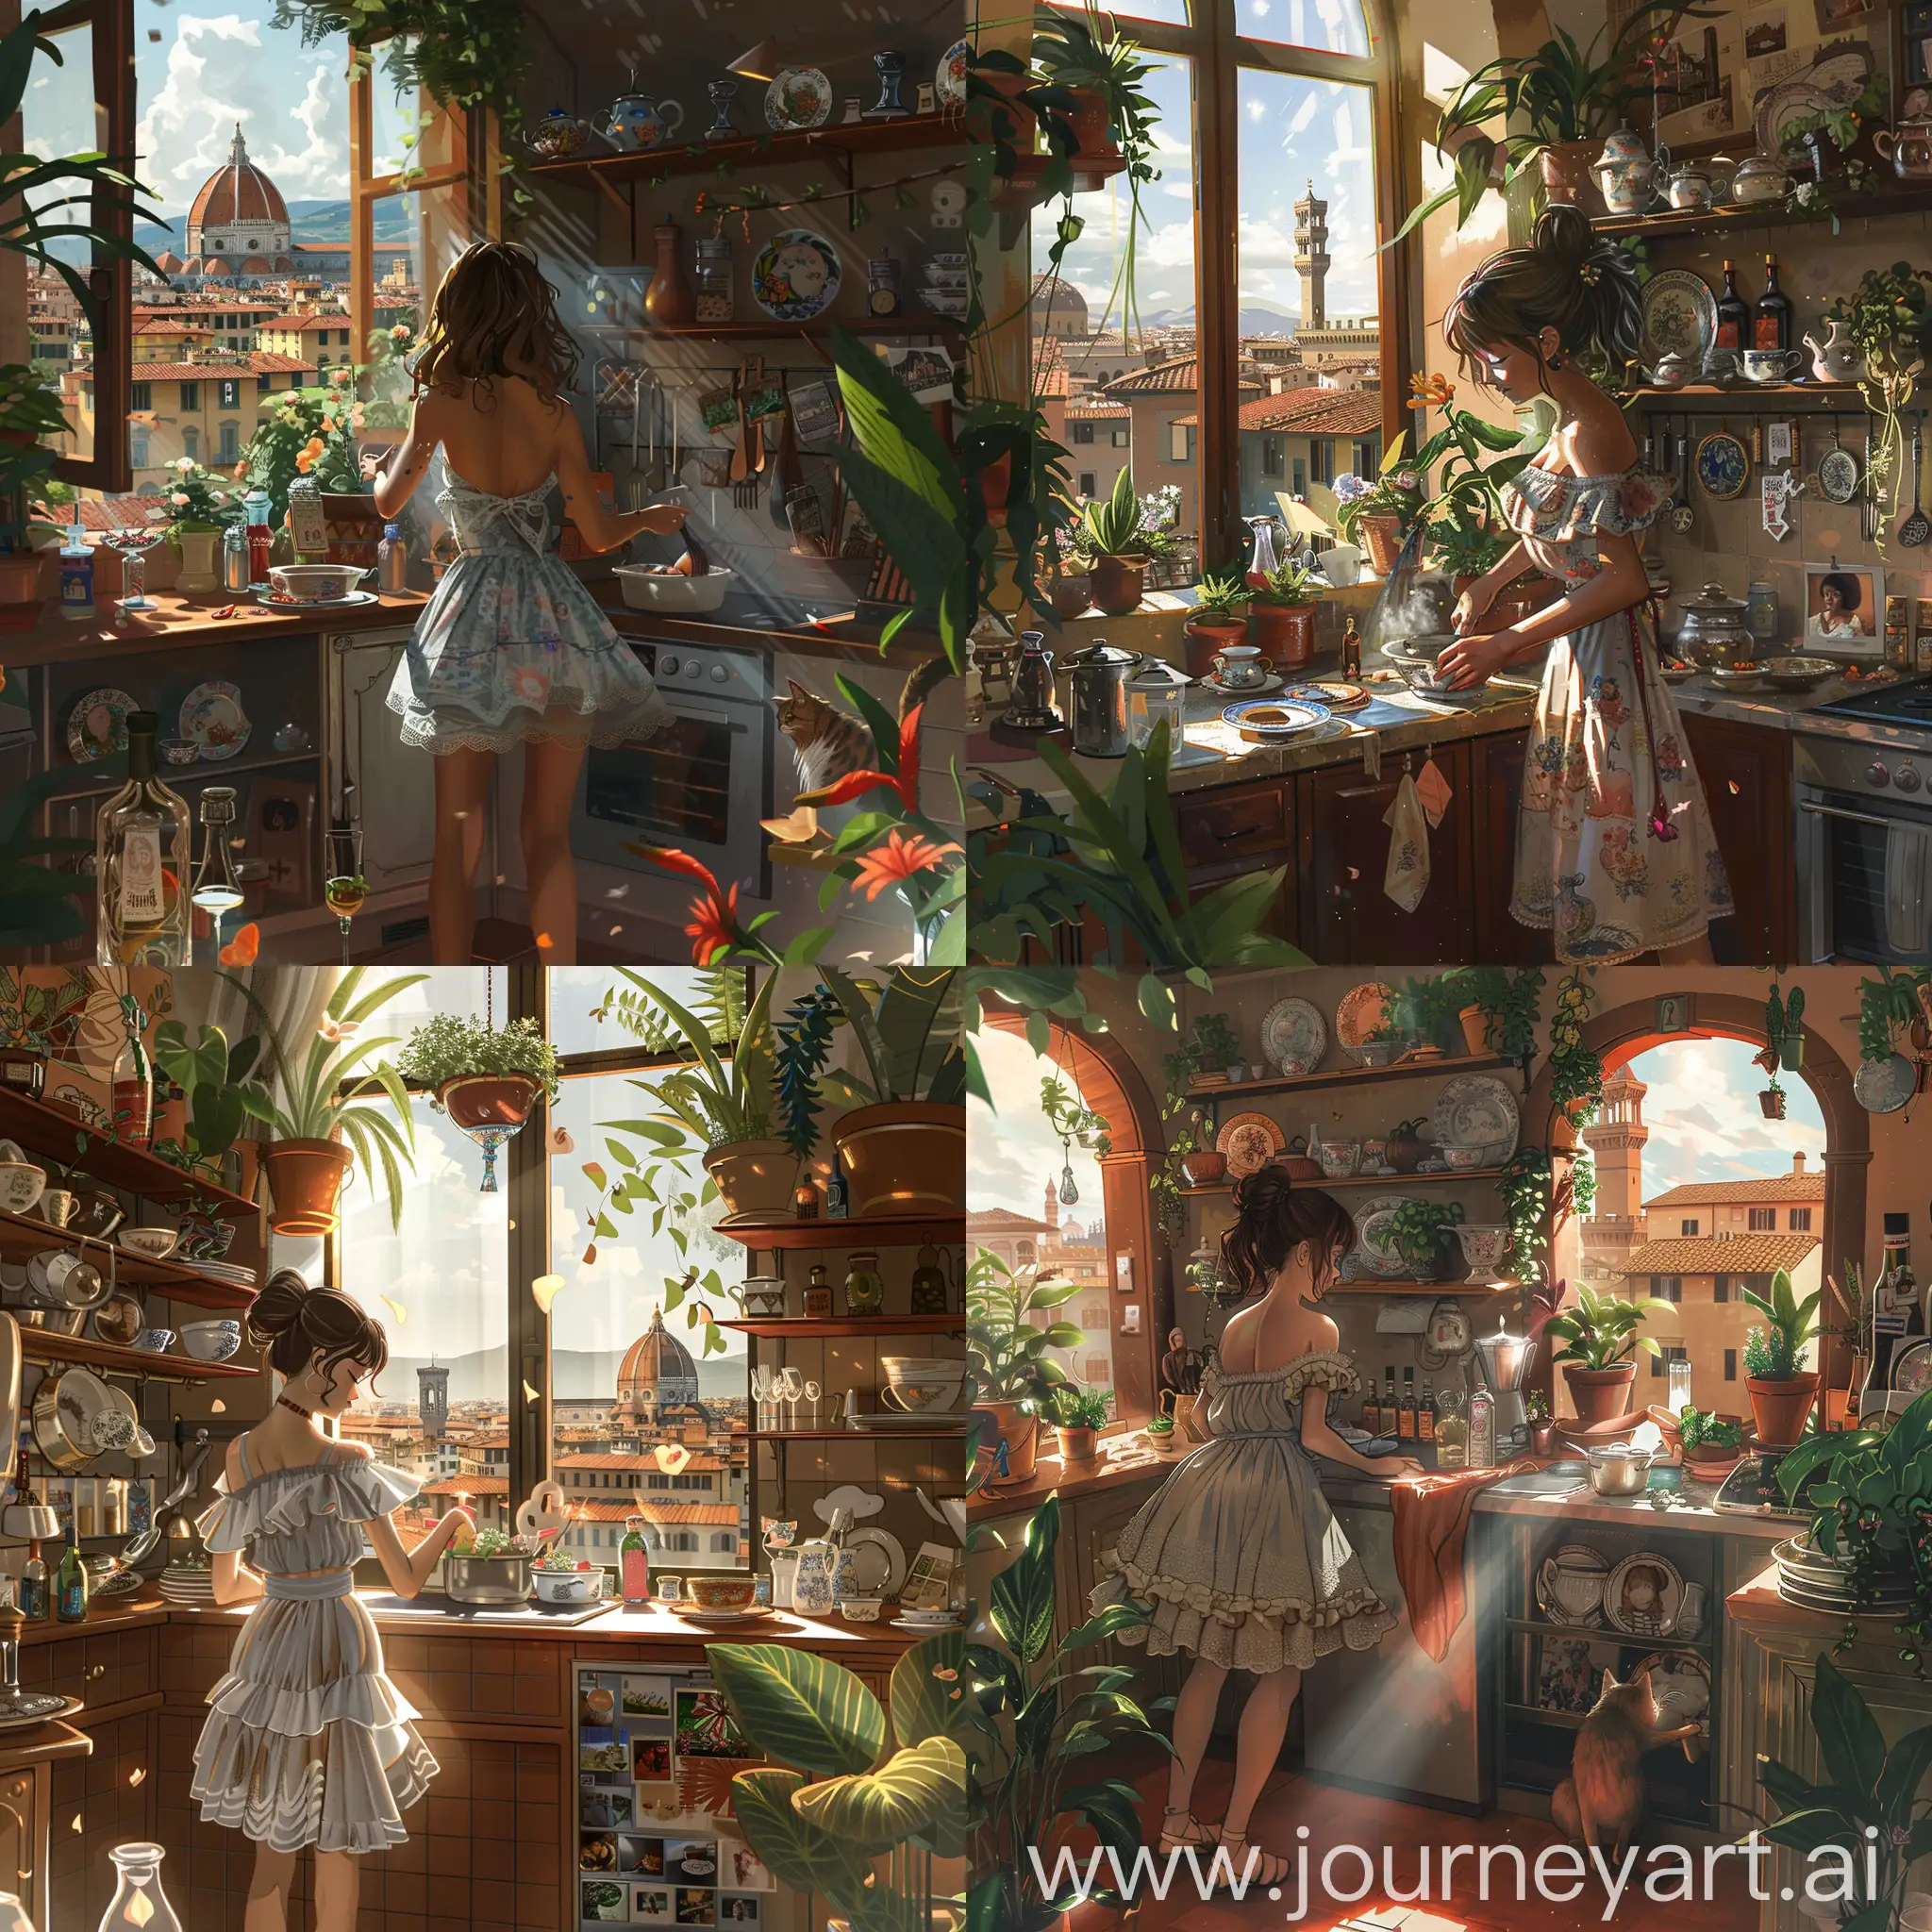 Stylish-French-Girl-Cooking-Among-Lush-Plants-in-Sunlit-Kitchen-Overlooking-Florence-Rooftops